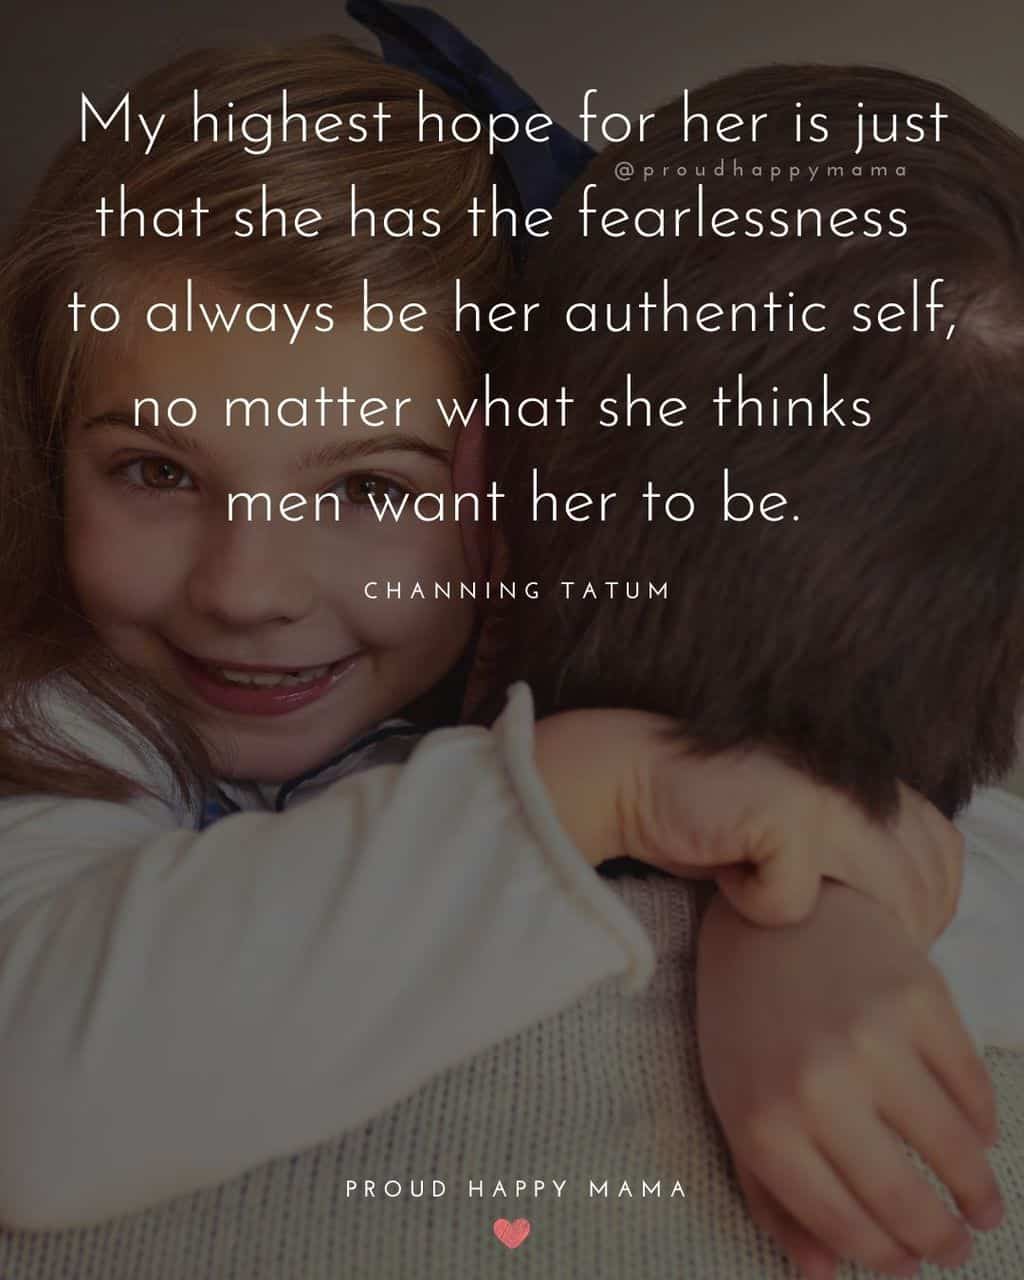 quotes about my daughter - ‘My highest hope for her is just that she has the fearlessness to always be her authentic self, no matter what she thinks